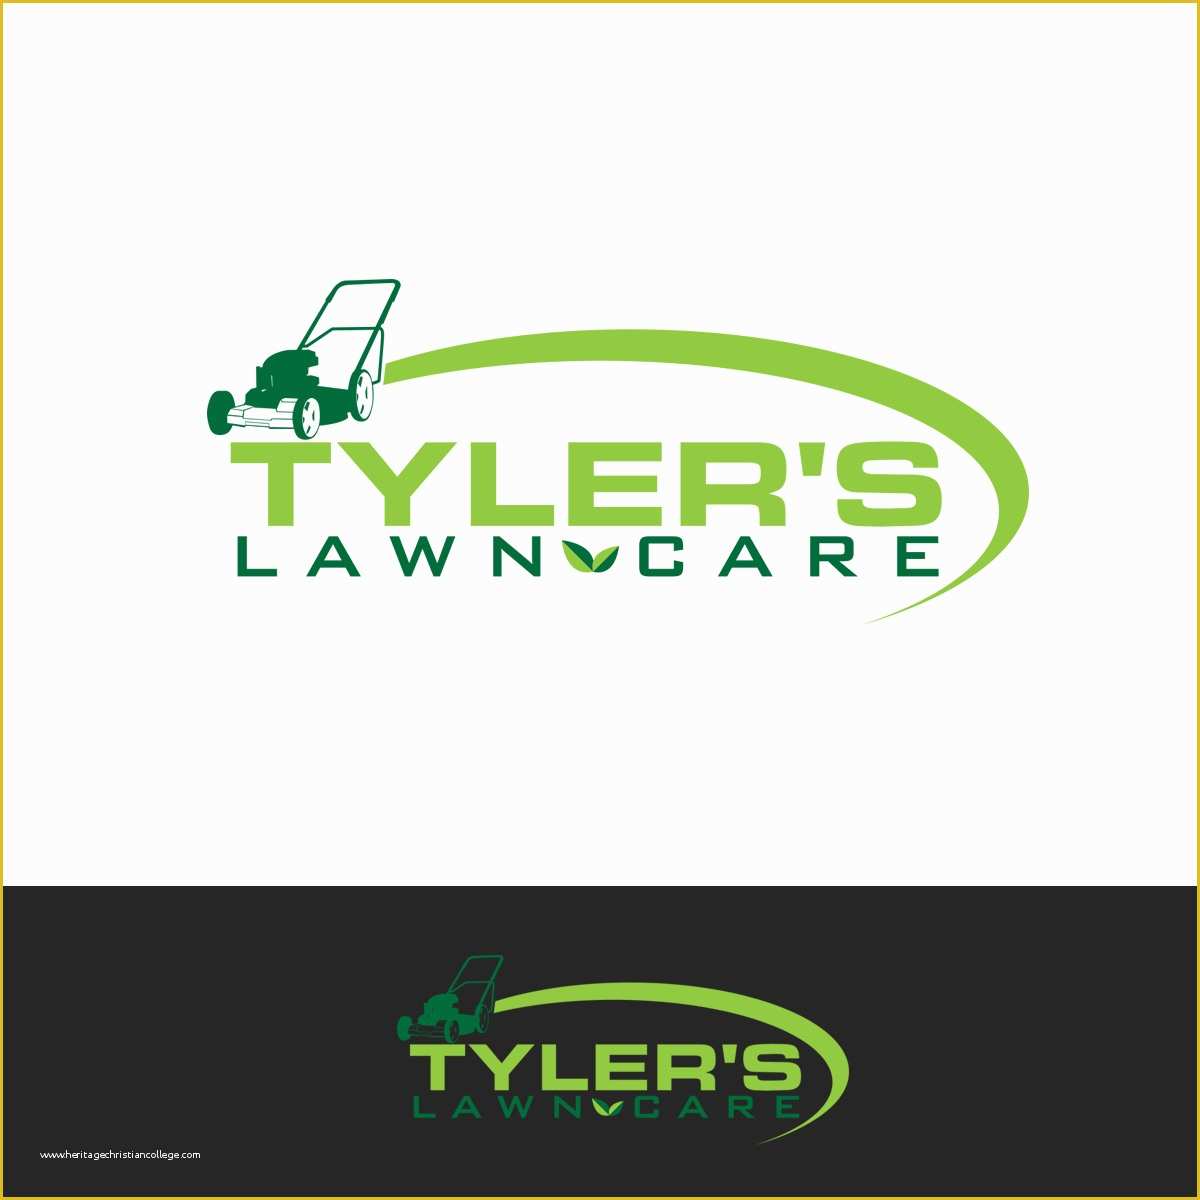 free-lawn-care-logo-templates-of-mowing-pany-logos-heritagechristiancollege